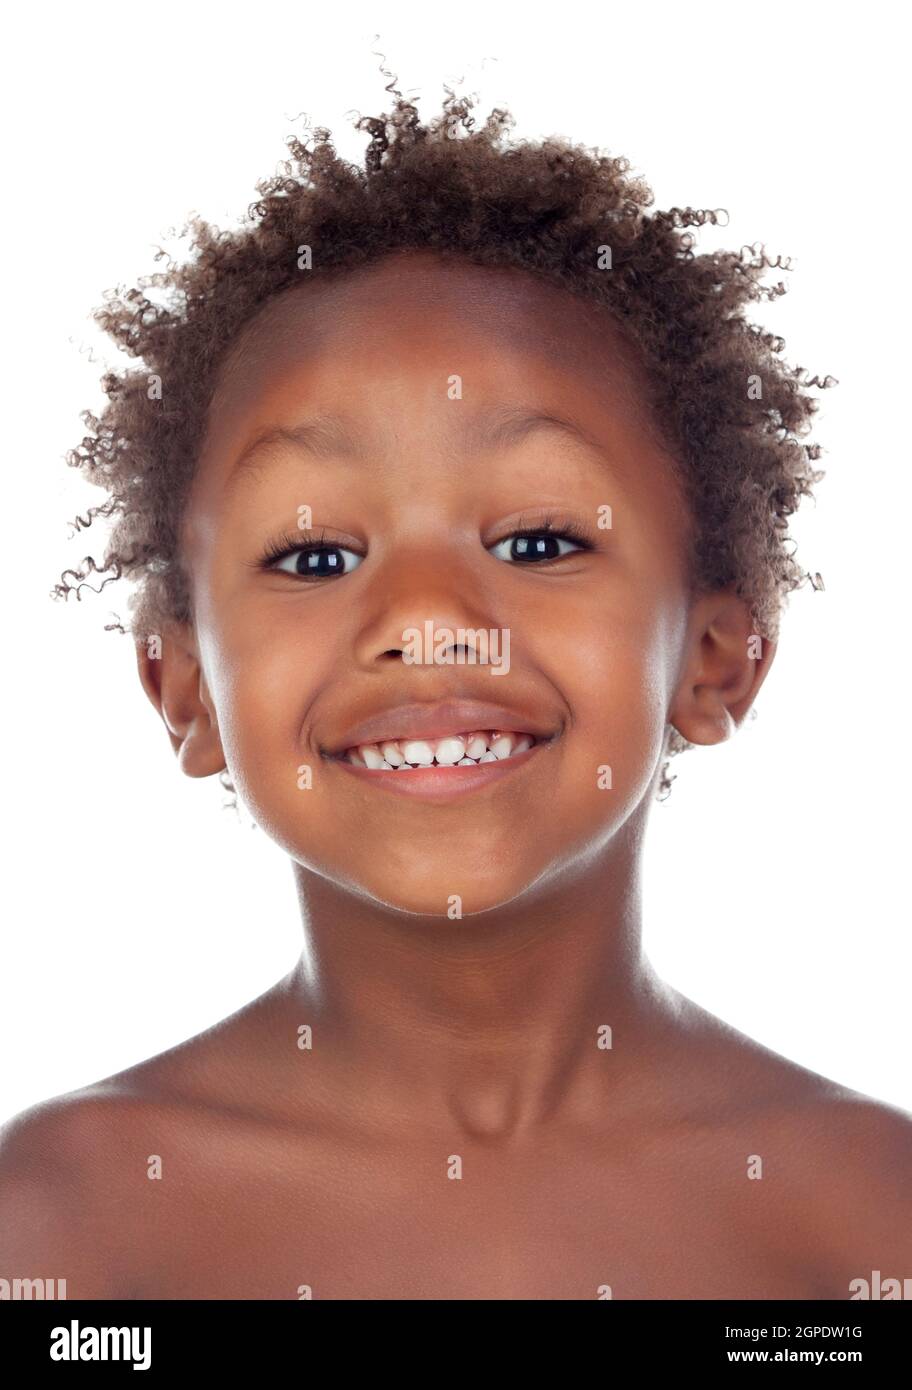 African child looking at camera isolated on white background Stock Photo